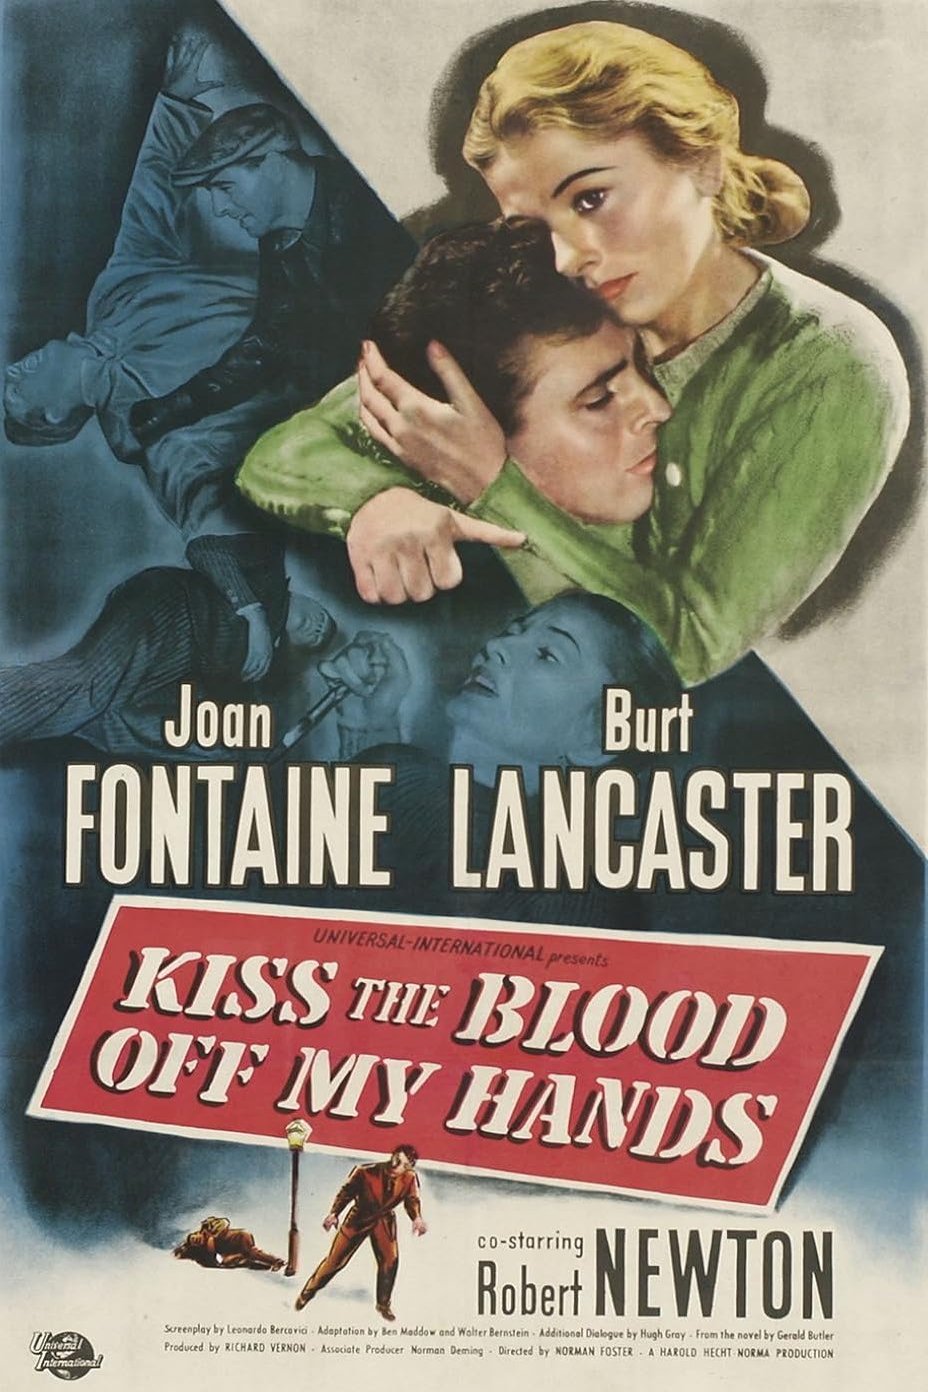 Poster of the movie Kiss the Blood Off My Hands